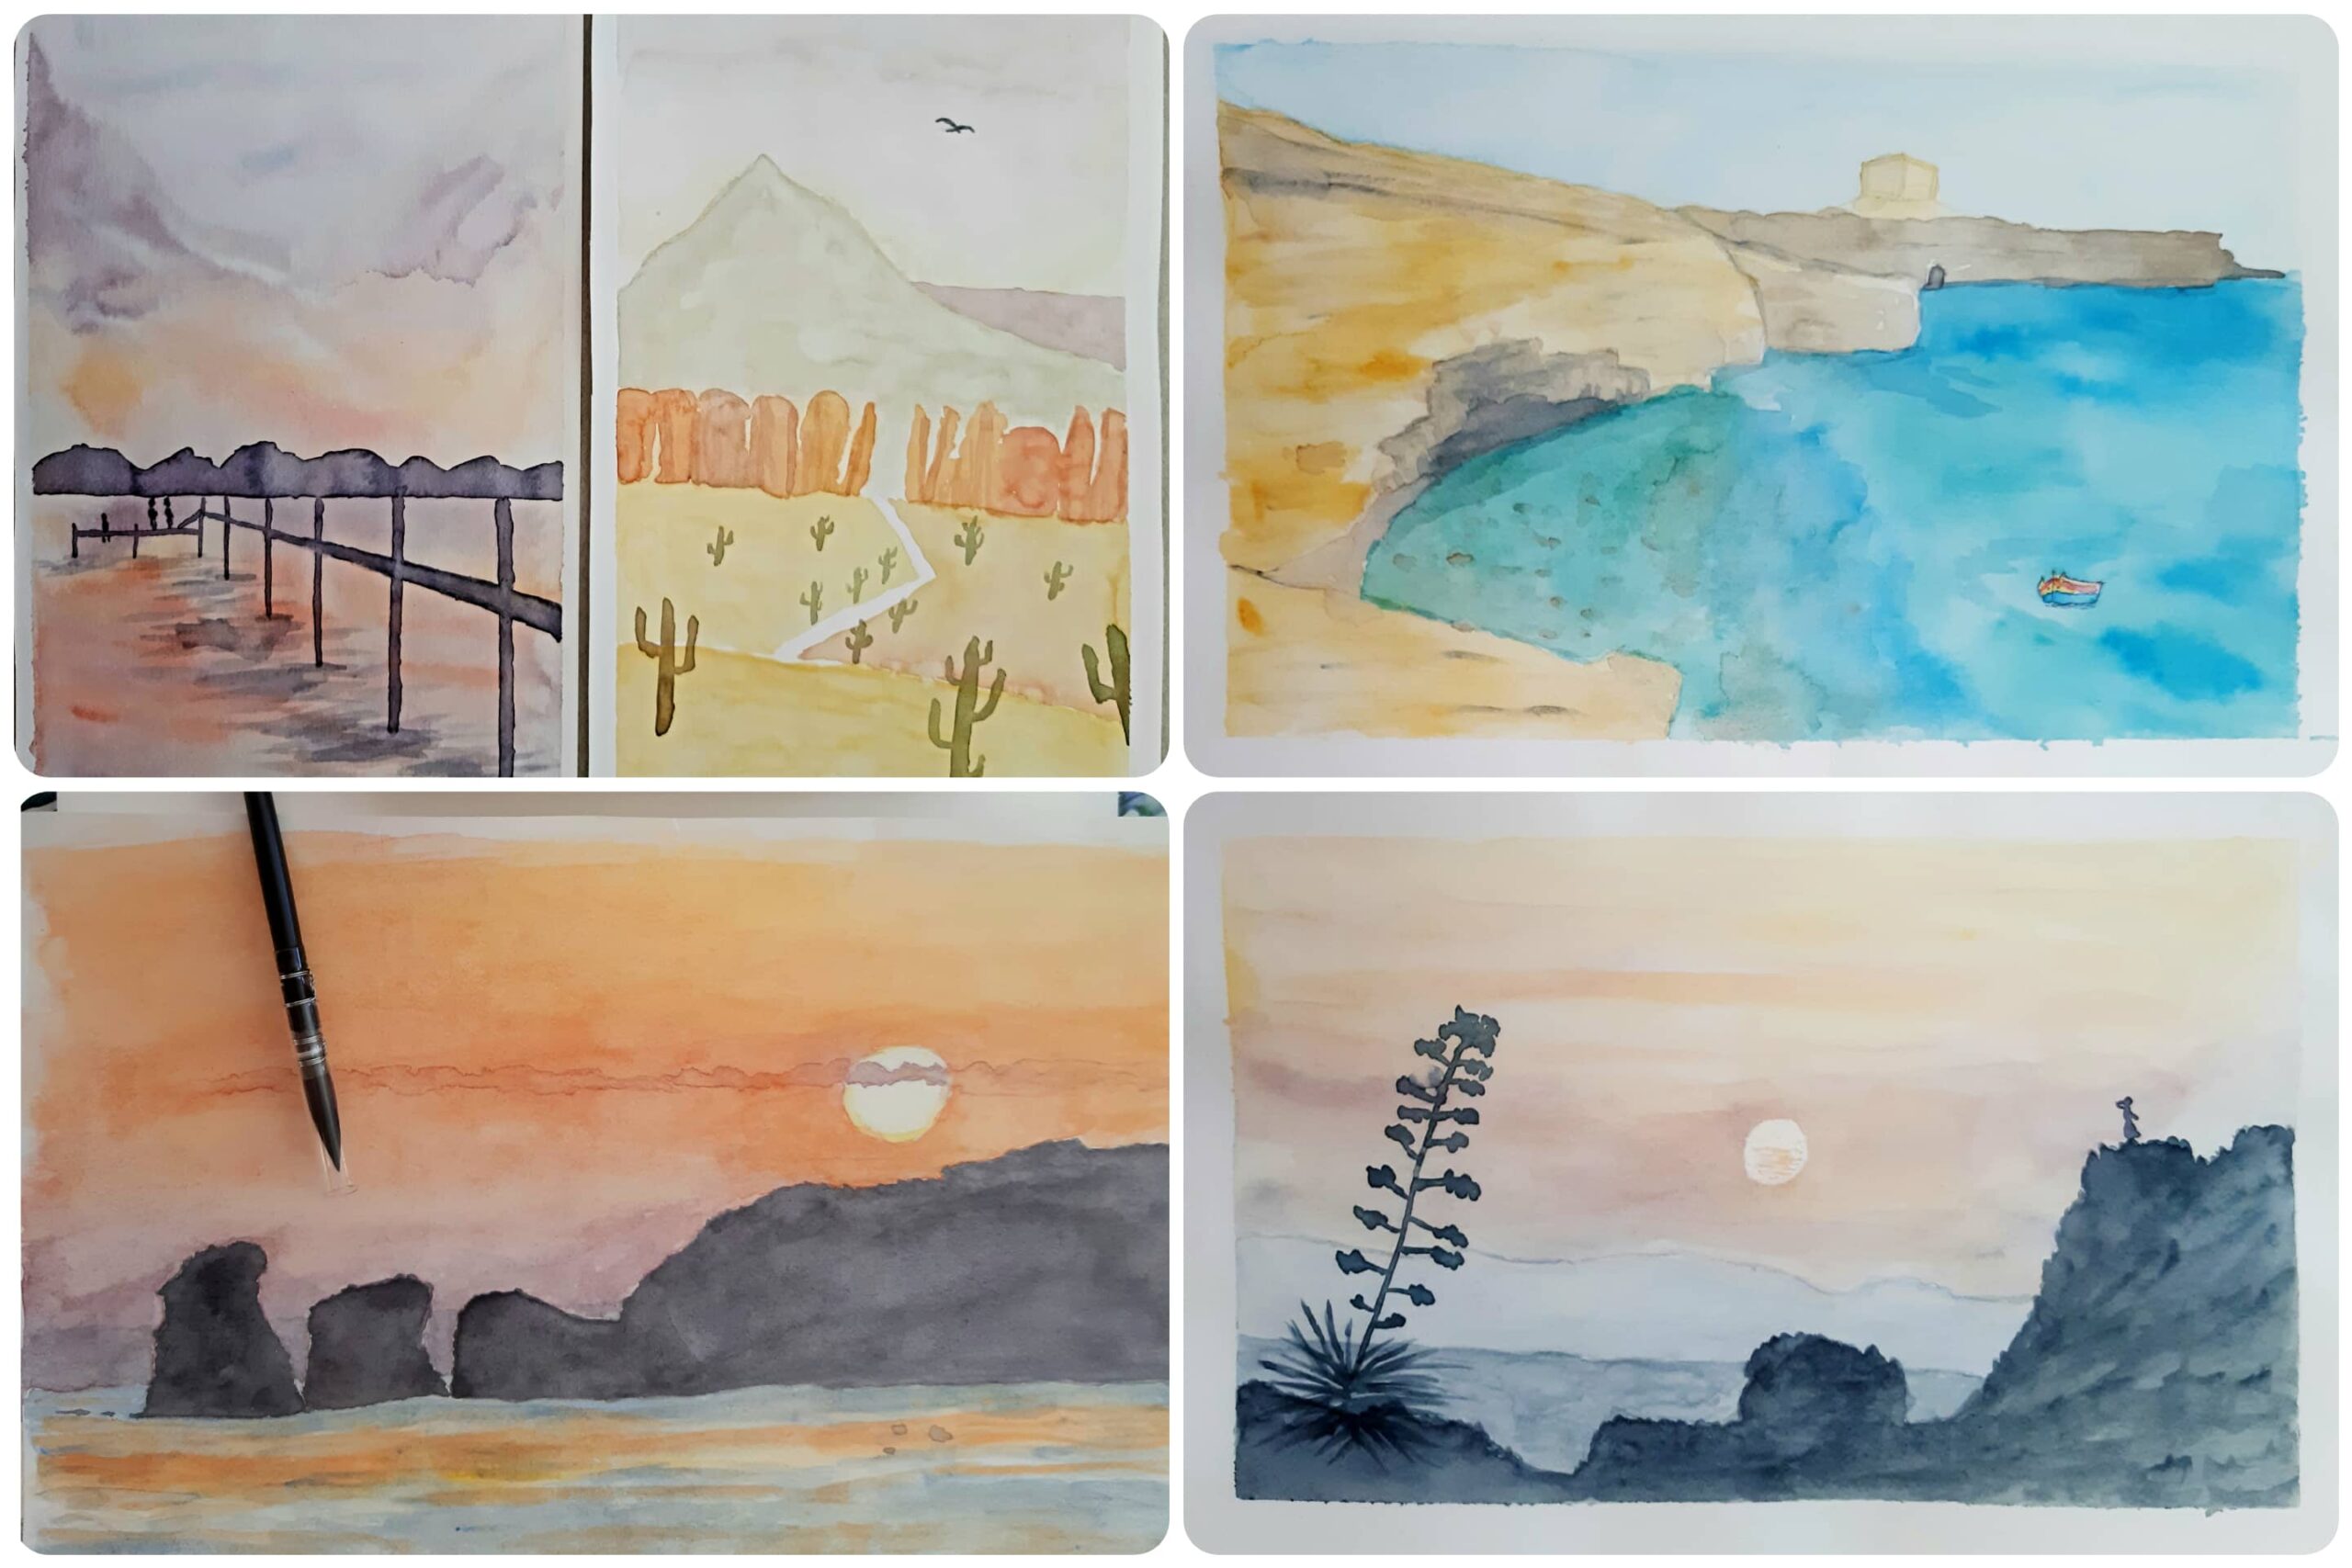 Landscapes I painted with watercolours.